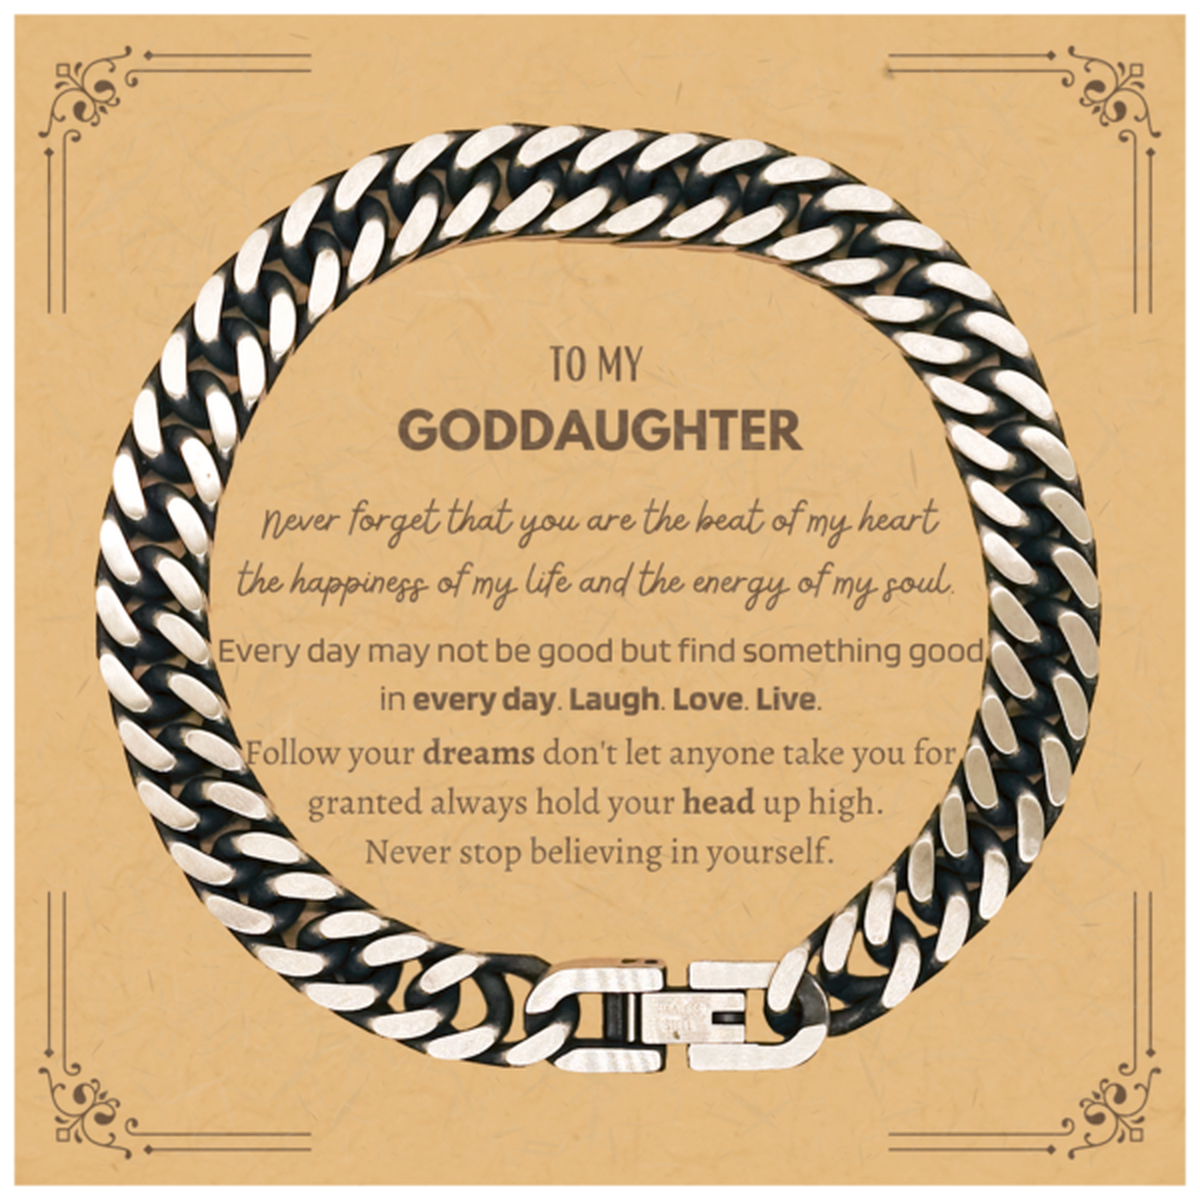 To My Goddaughter Message Card Gifts, Christmas Goddaughter Cuban Link Chain Bracelet Present, Birthday Unique Motivational For Goddaughter, To My Goddaughter Never forget that you are the beat of my heart the happiness of my life and the energy of my sou